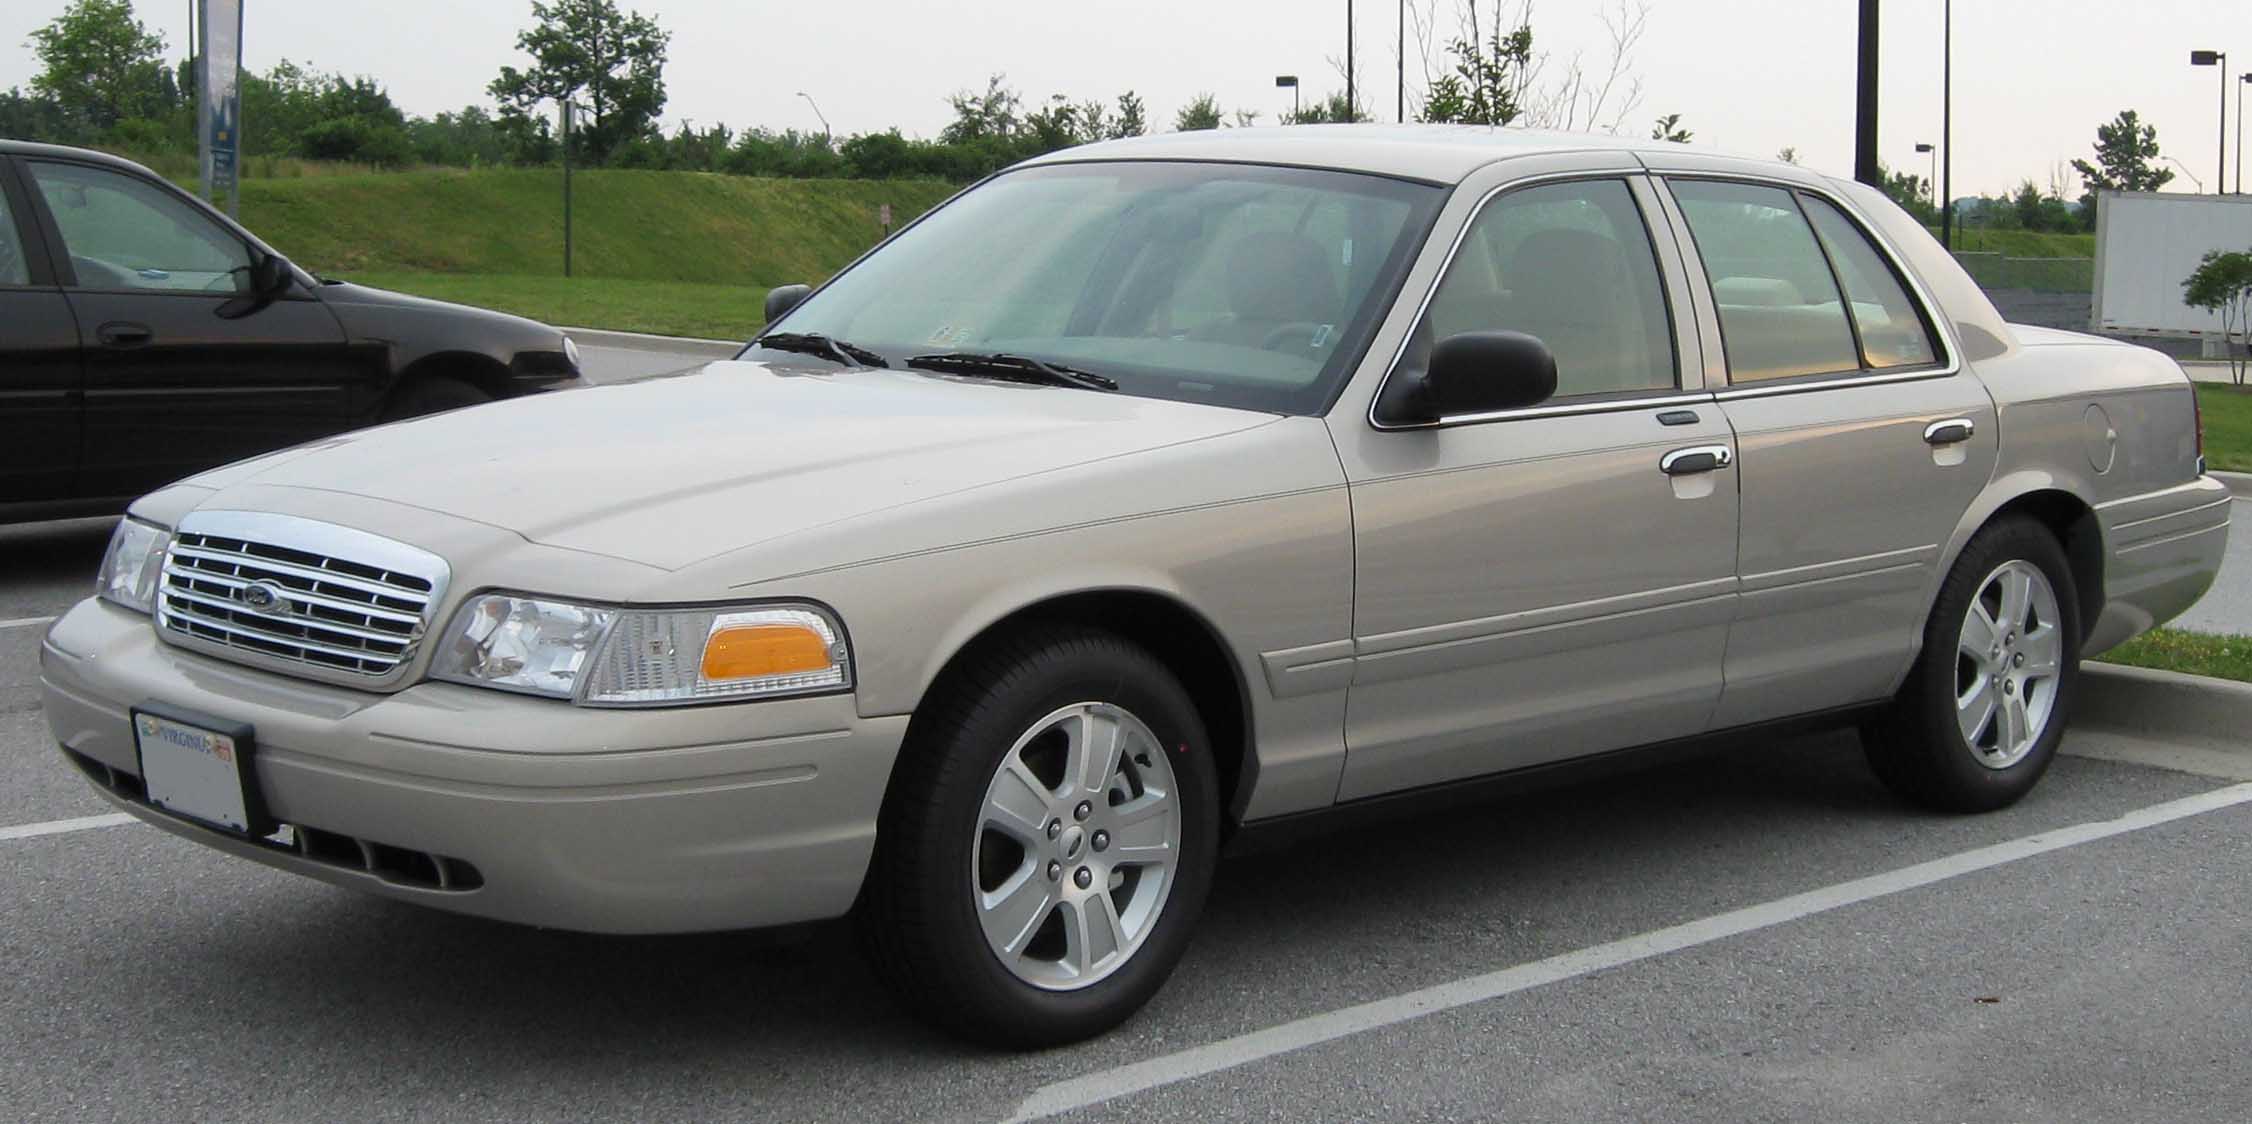 Ford Crown Victoria 1996 #4